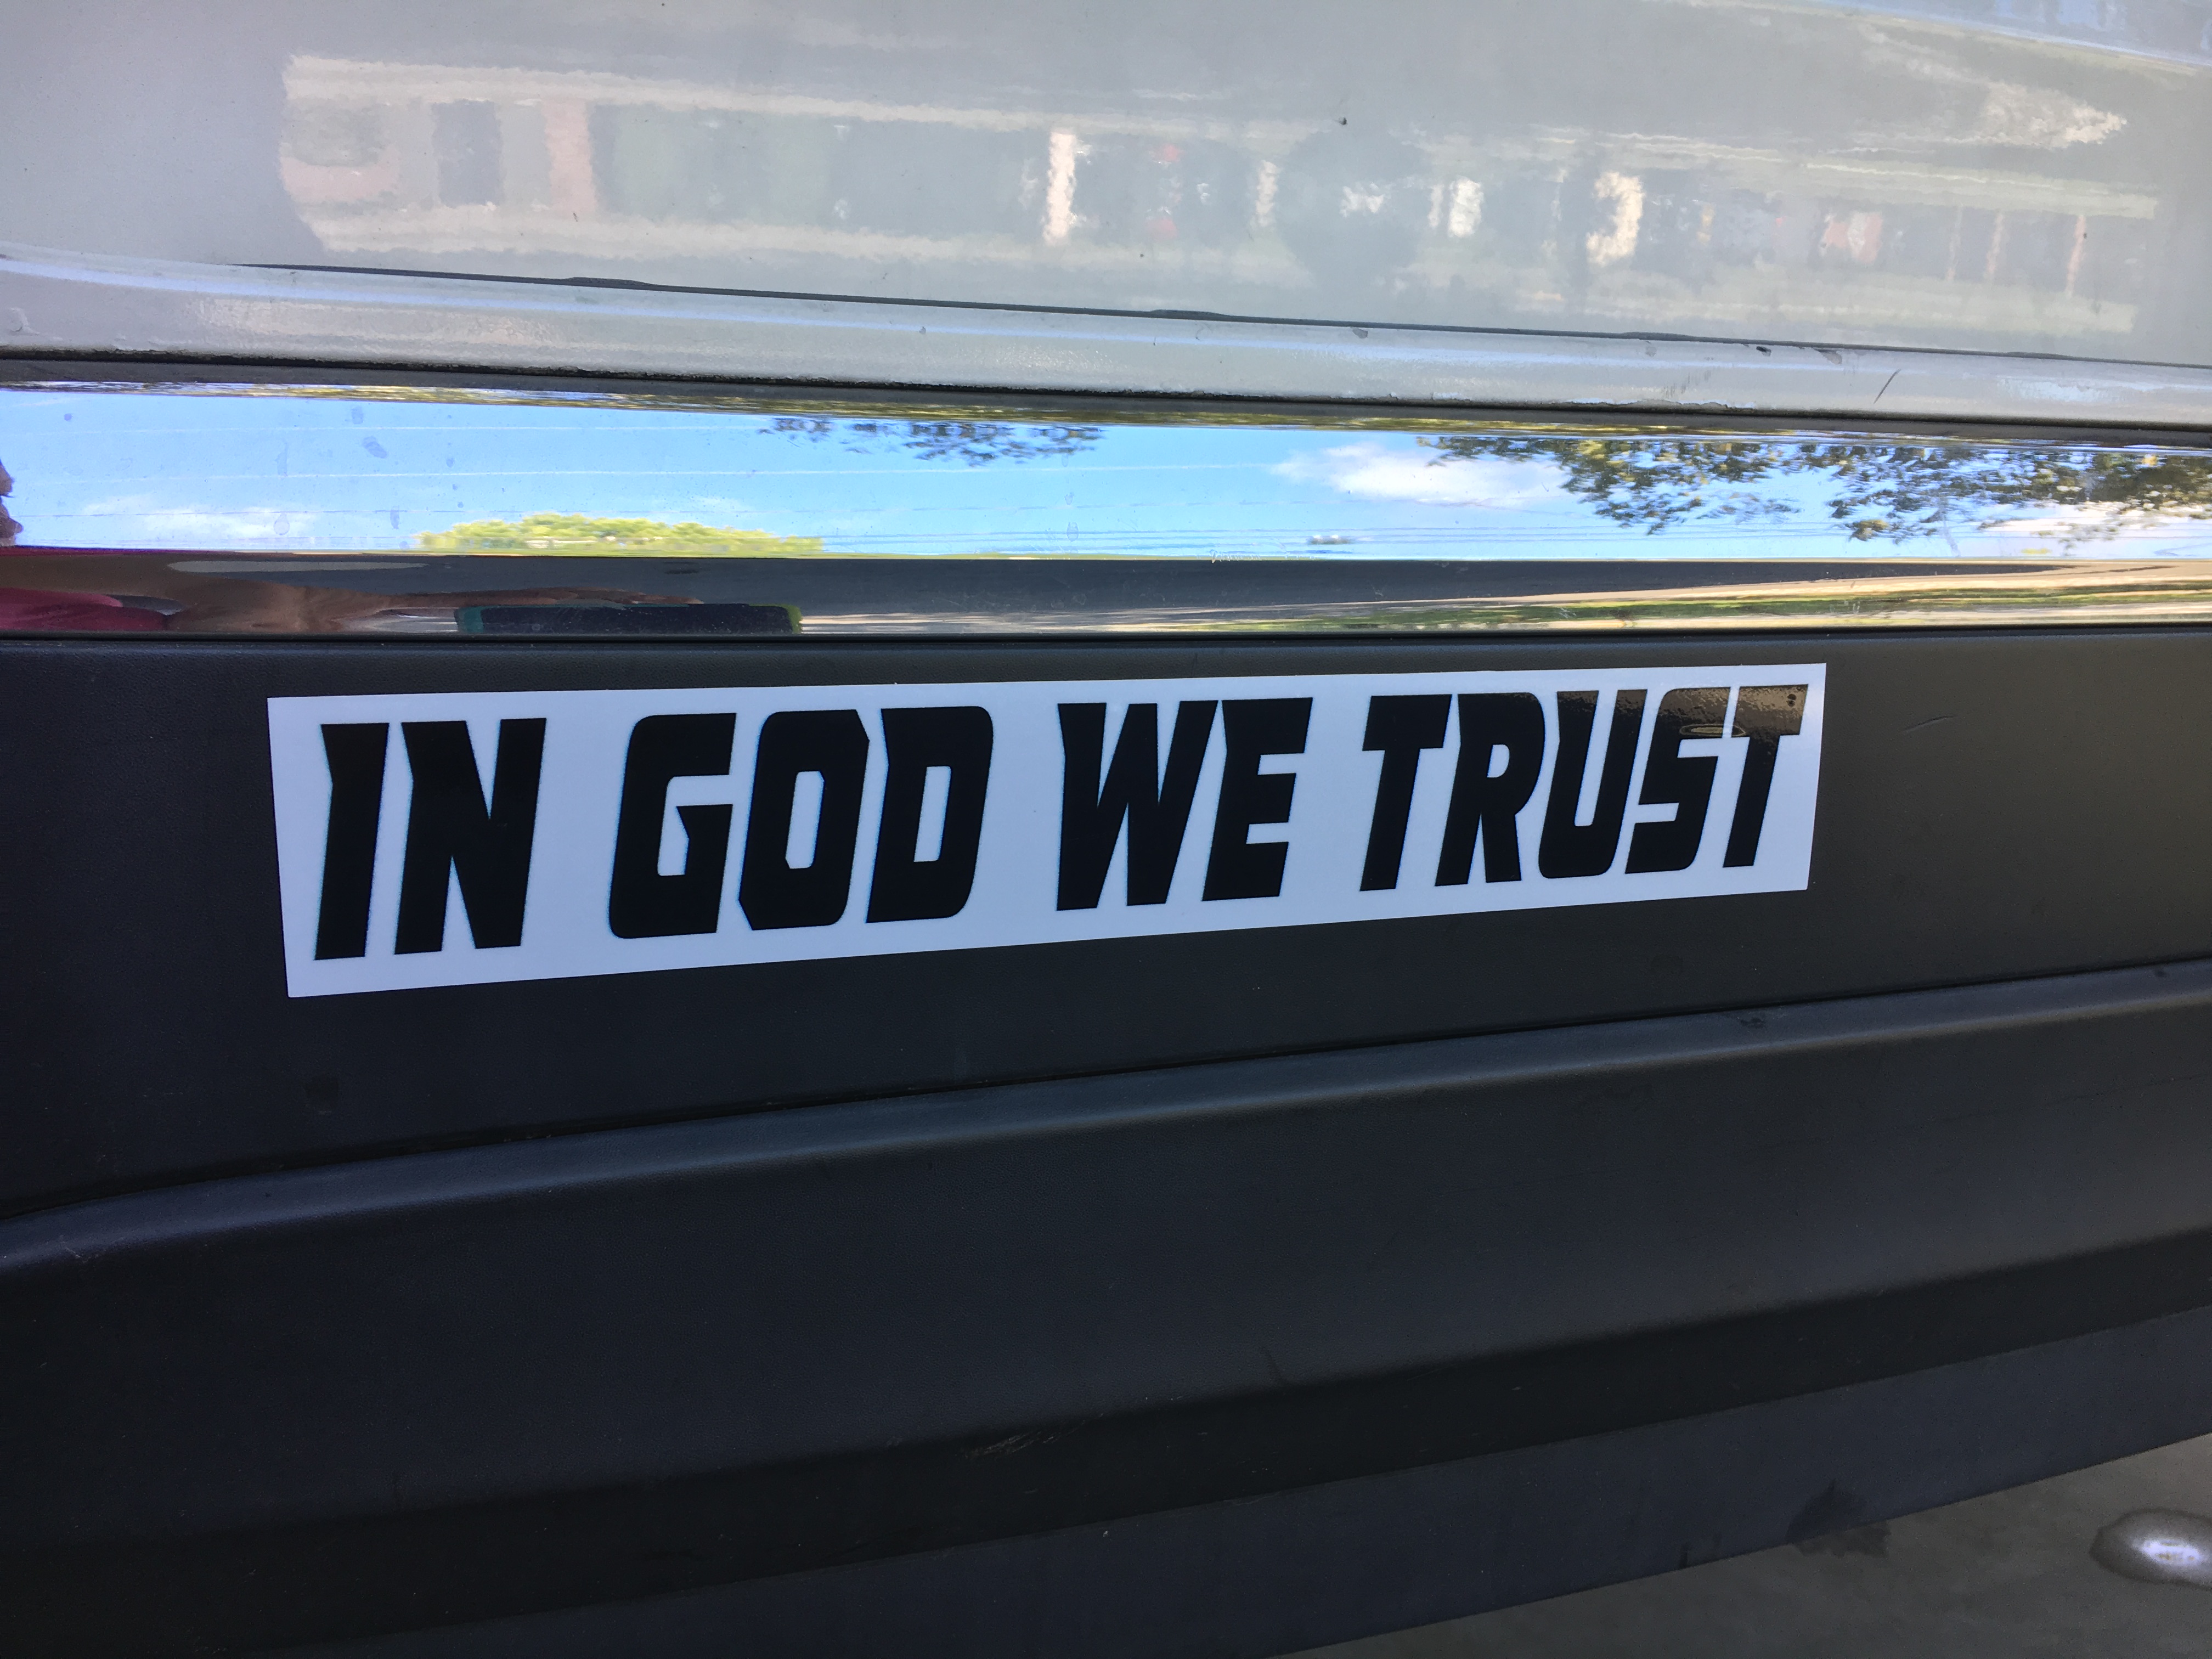 Tailgating bumper stickers